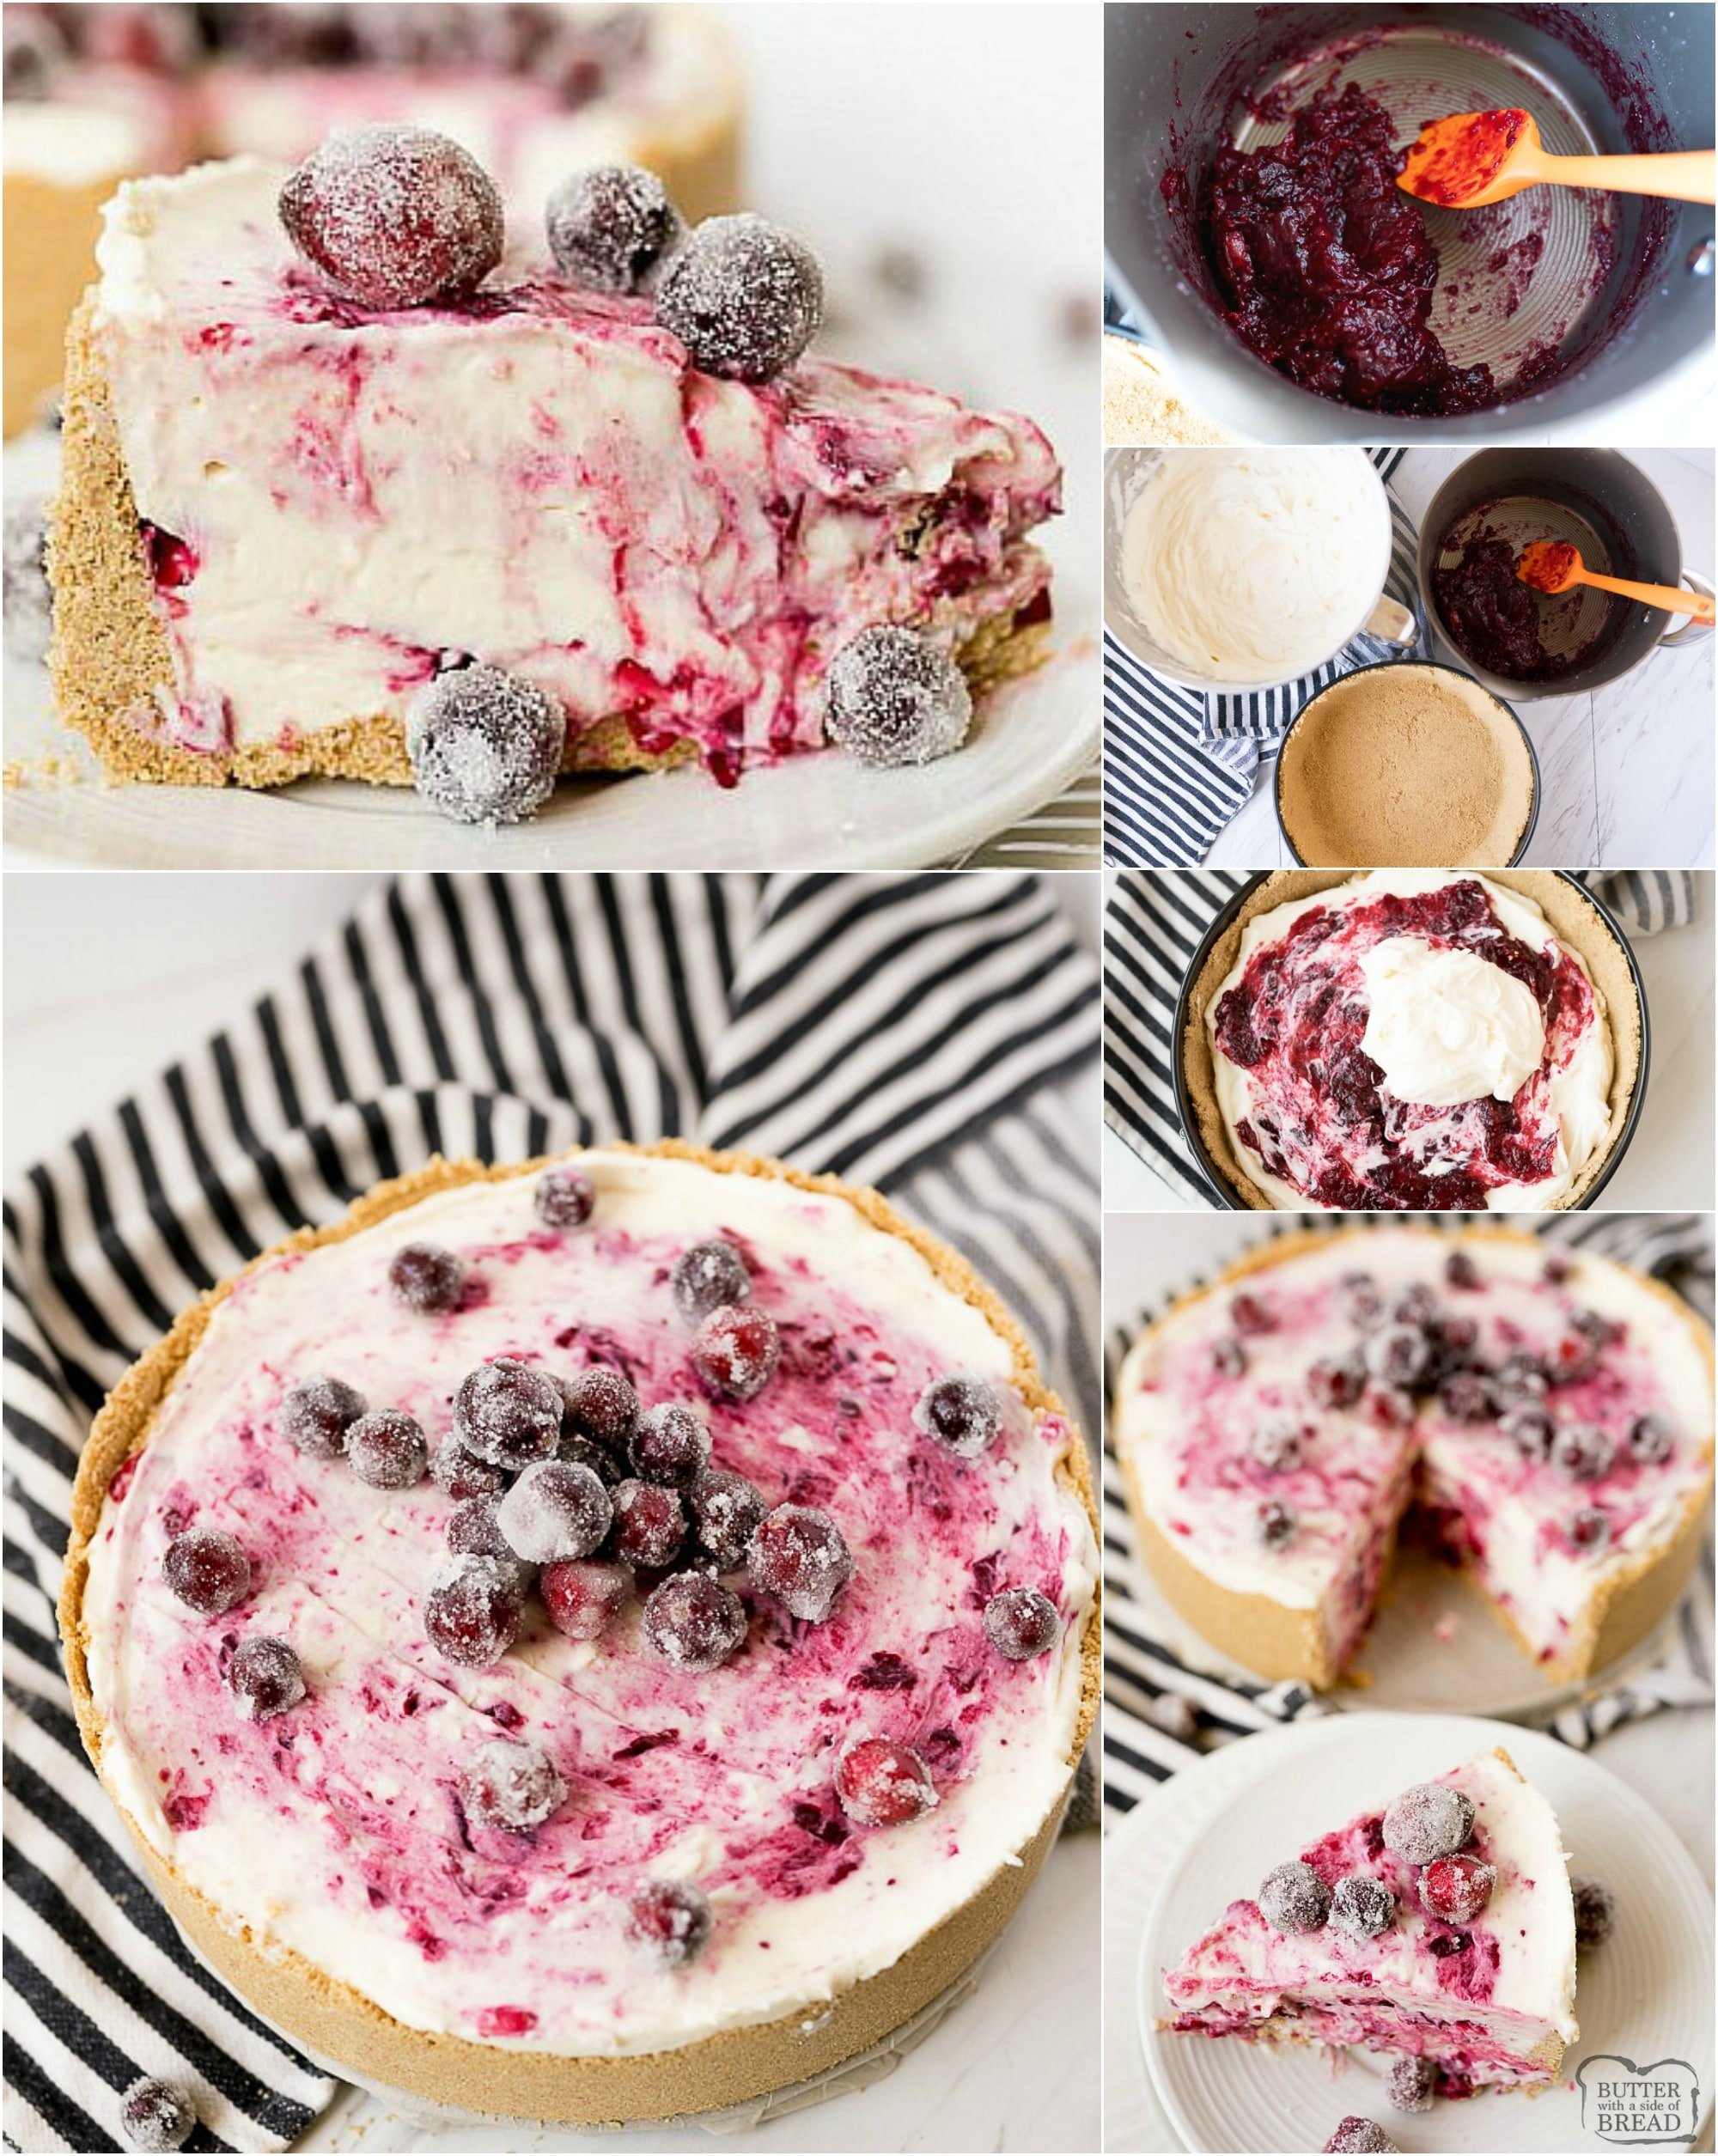 Cranberry Cheesecake Recipe has a fresh cranberry swirl and sugared cranberries as garnish! Easy 4-ingredient NO-BAKE cheesecake filling that's perfect for beginners.